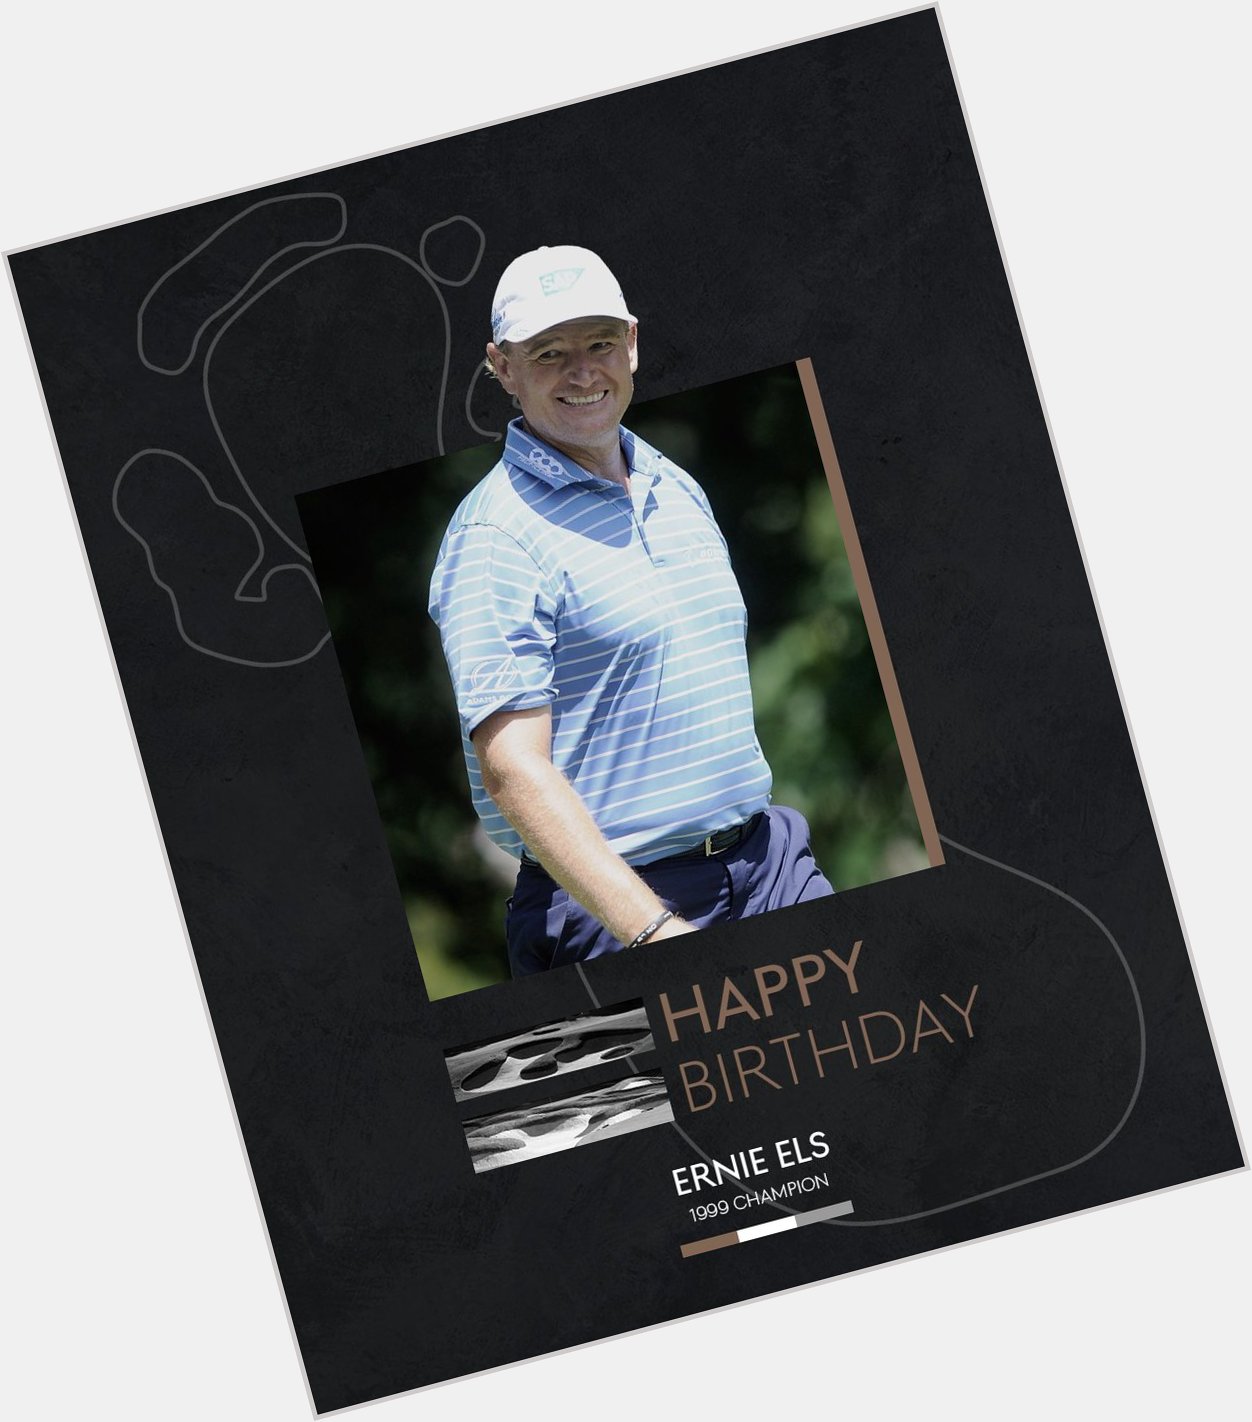 Happy birthday to our 1999 champion, Ernie Els 